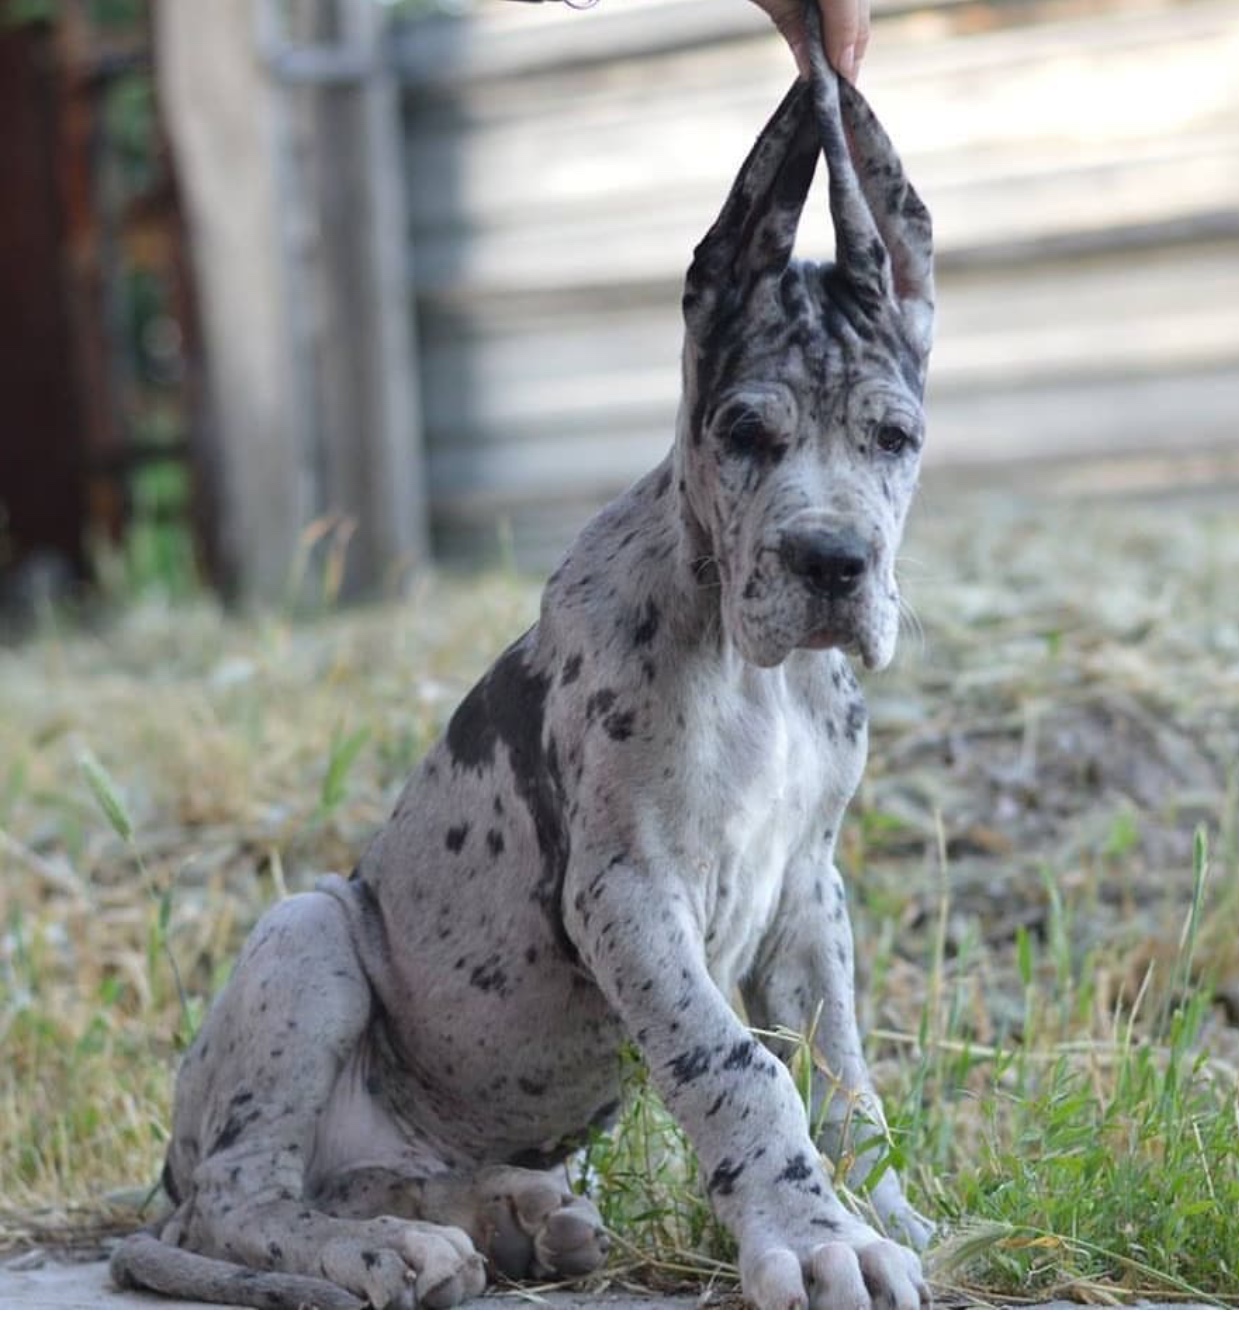 A Great Dane puppy sitting on the ground while its ears are held up by a person